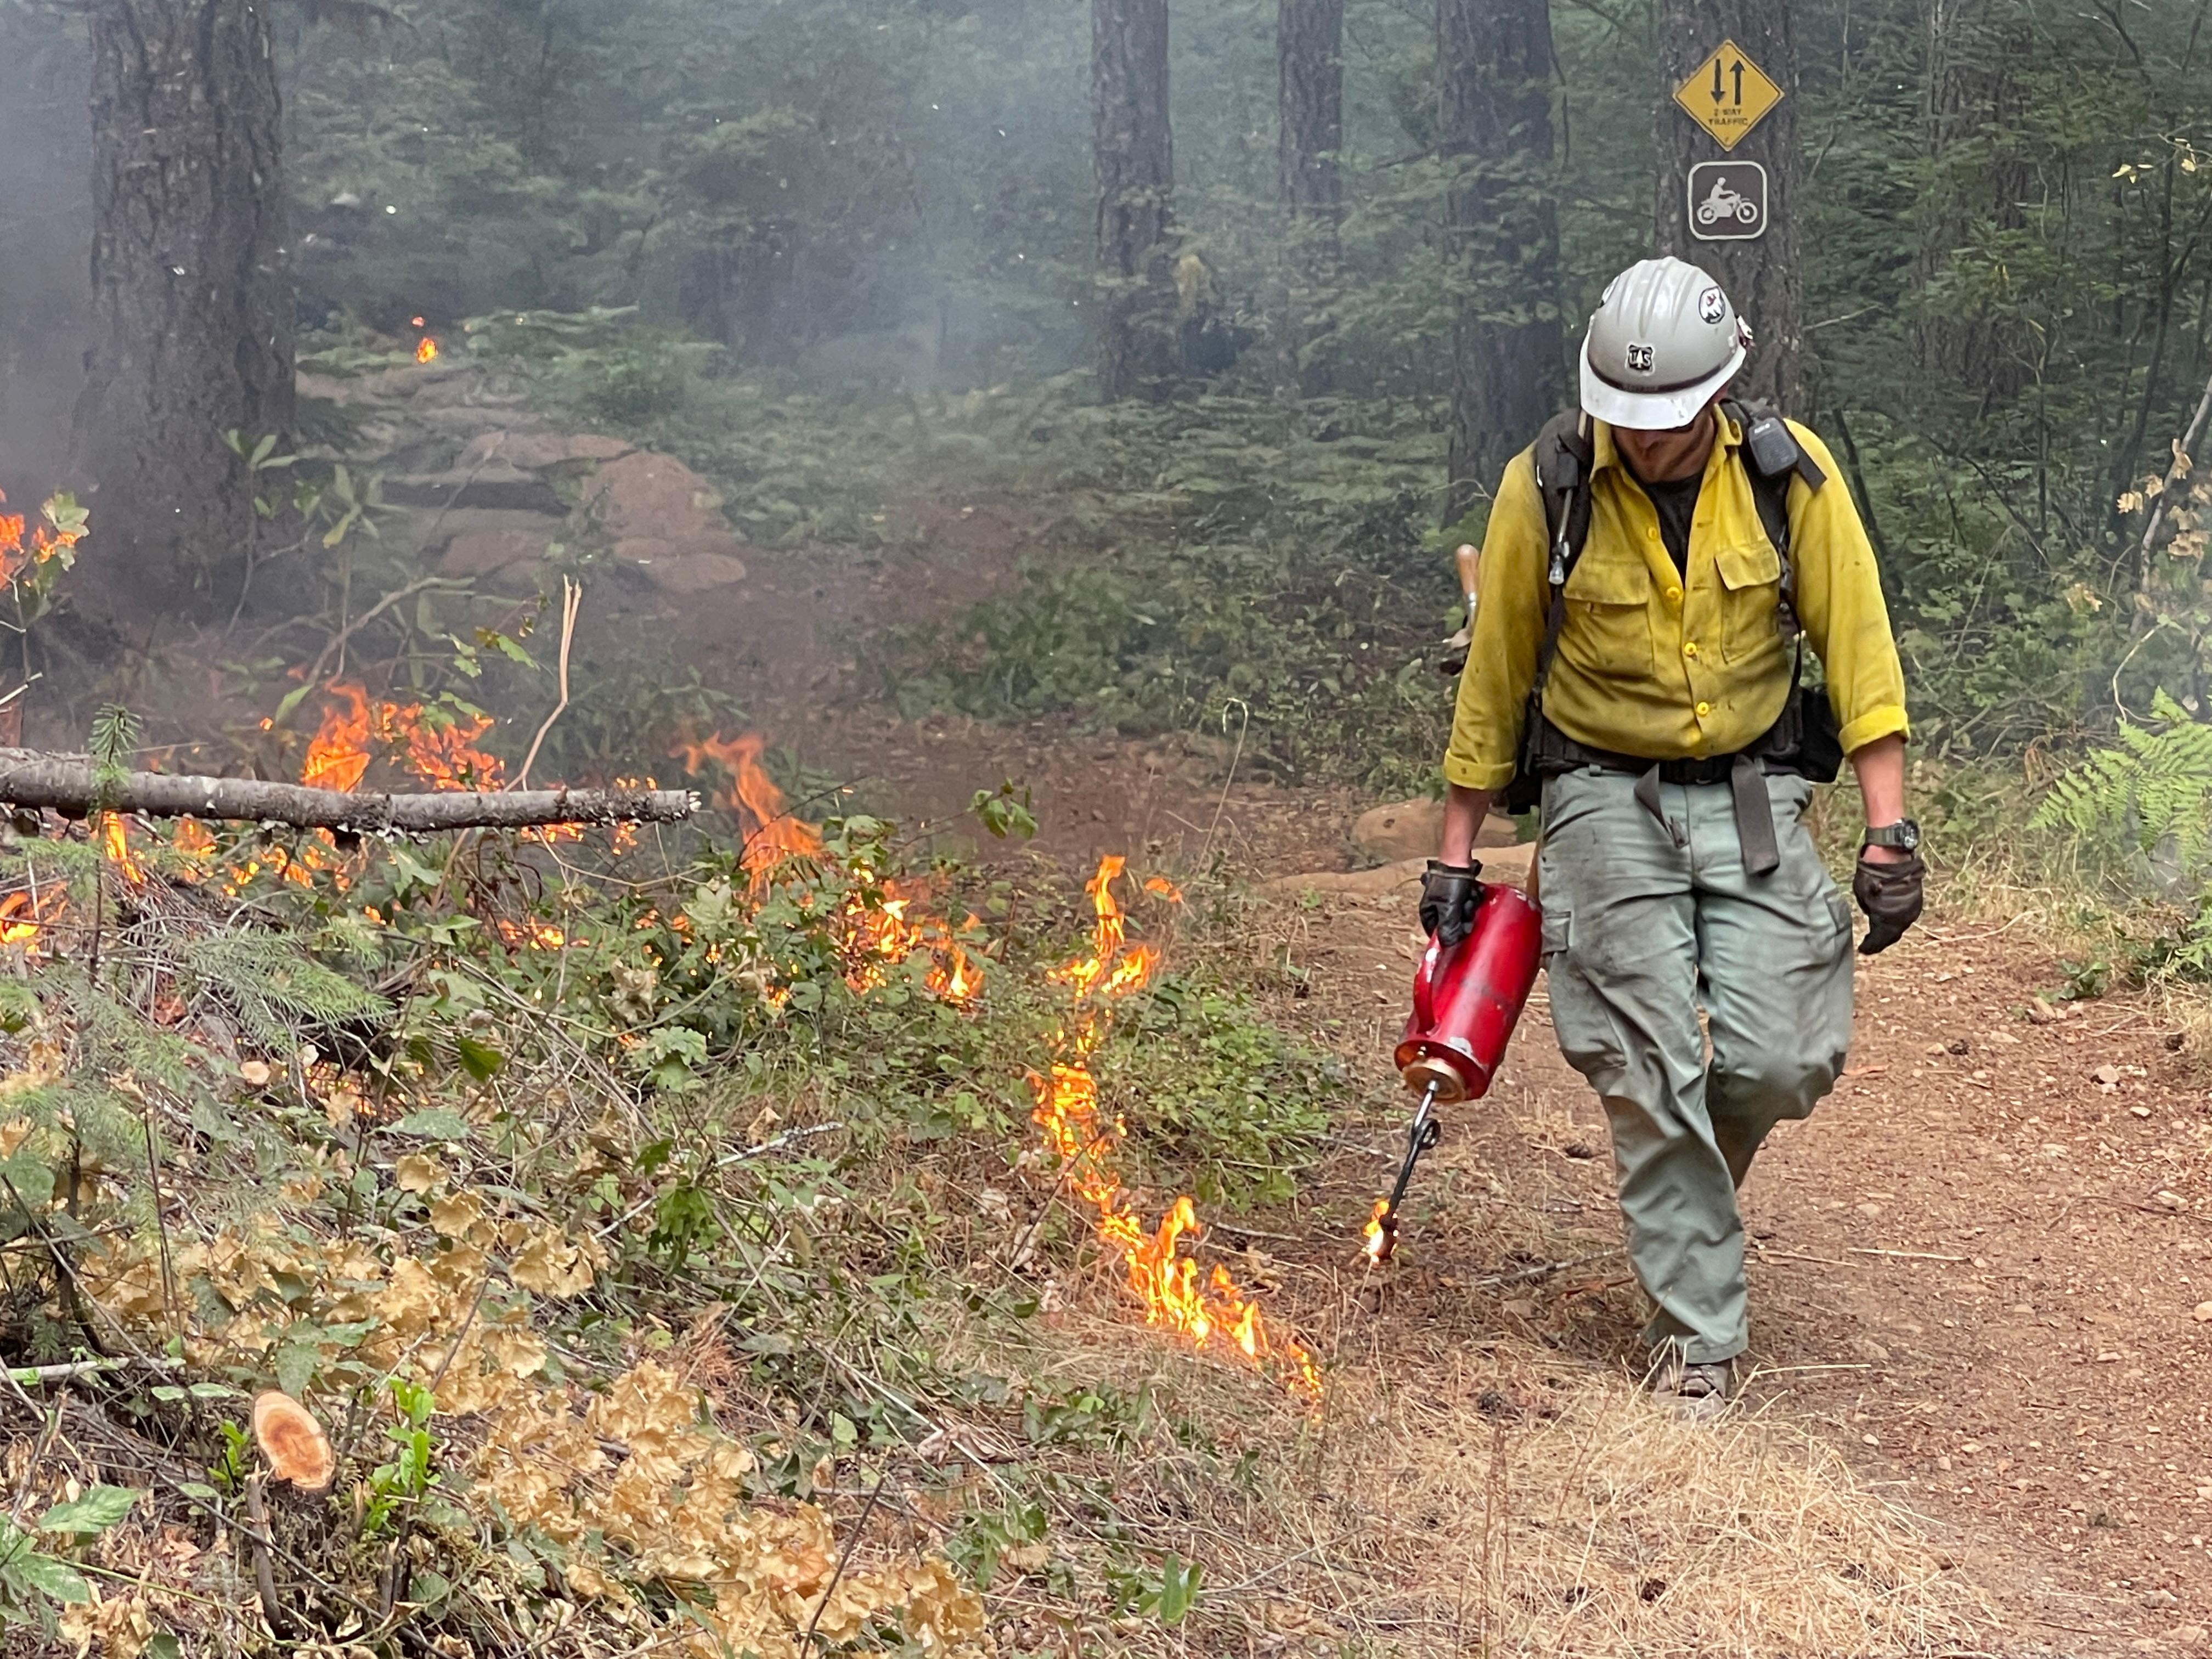 Firefighter using a drip torch to light burning operations in Division Y near Huckleberry Flat OHV area.